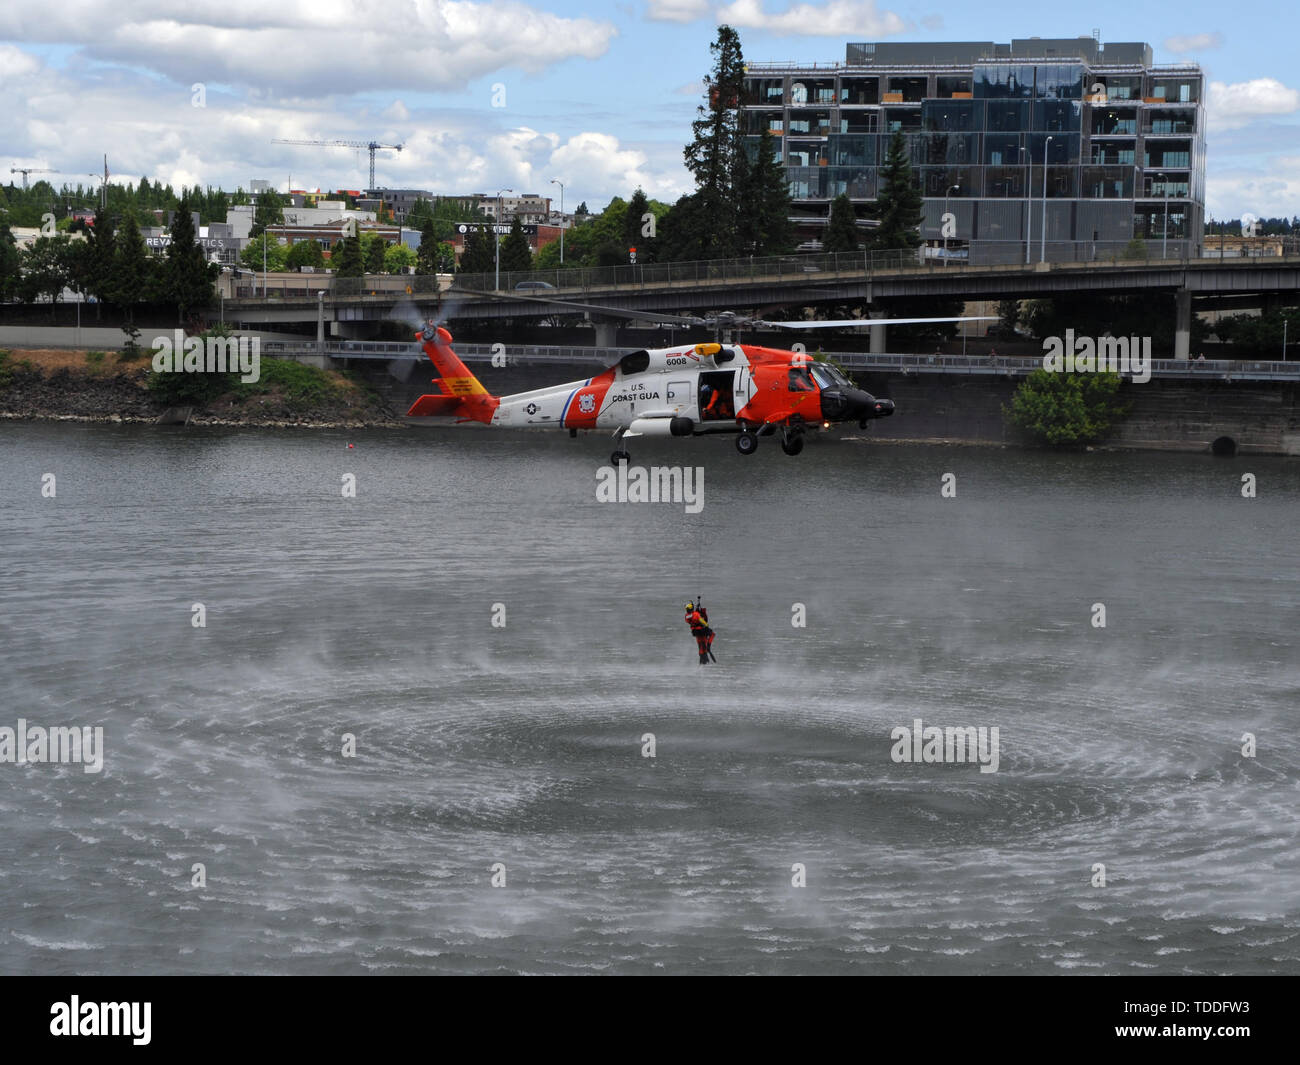 A Coast Guard aircrew aboard an MH-60 Jayhawk helicopter from Sector Columbia River lowers an aviation survival technician into the Willamette River during the Rose Festival in Portland, Ore., June 8, 2019.     The aircrew dropped a training dummy into the river to demonstrate a recovery operation for the thousands of onlookers attending the Rose Festival Fleet Week.     U.S. Coast Guard photo by Petty Officer 3rd Class Trevor Lilburn. Stock Photo